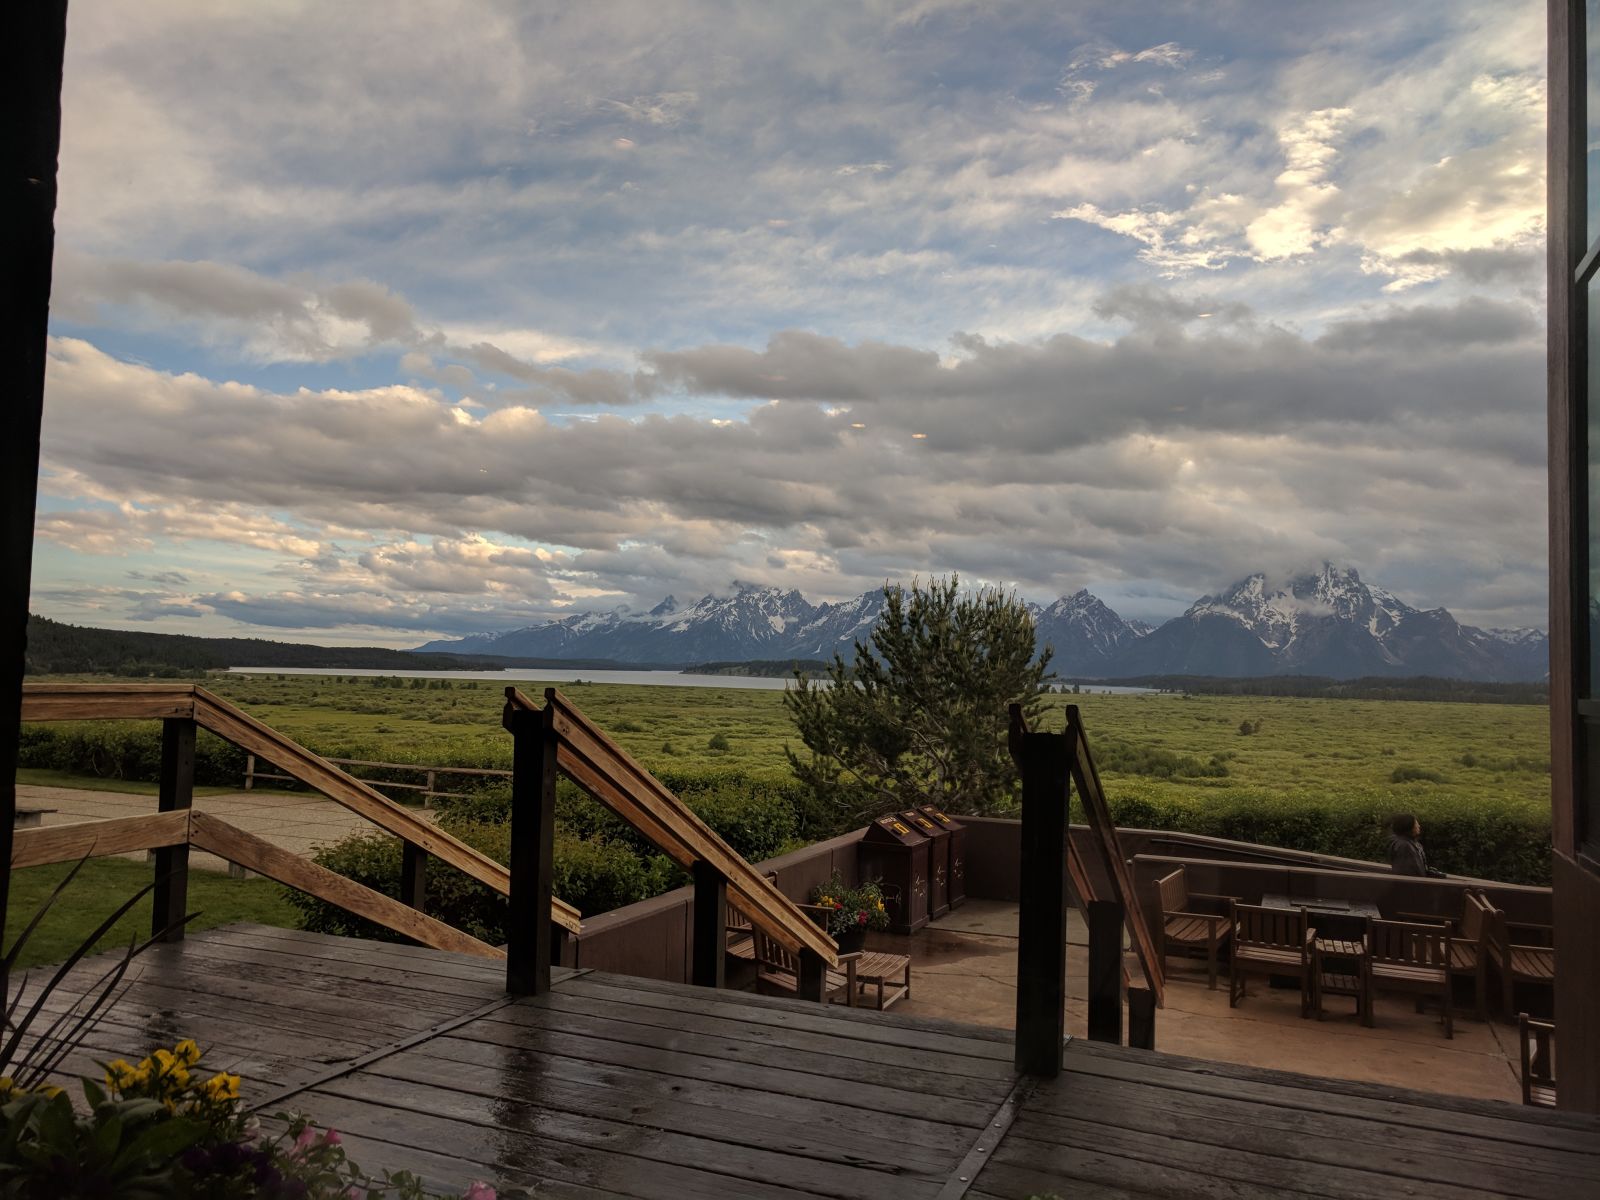 Illustration for article titled View from our hotel in Grand Teton NP last night, and pics from Yellowstone